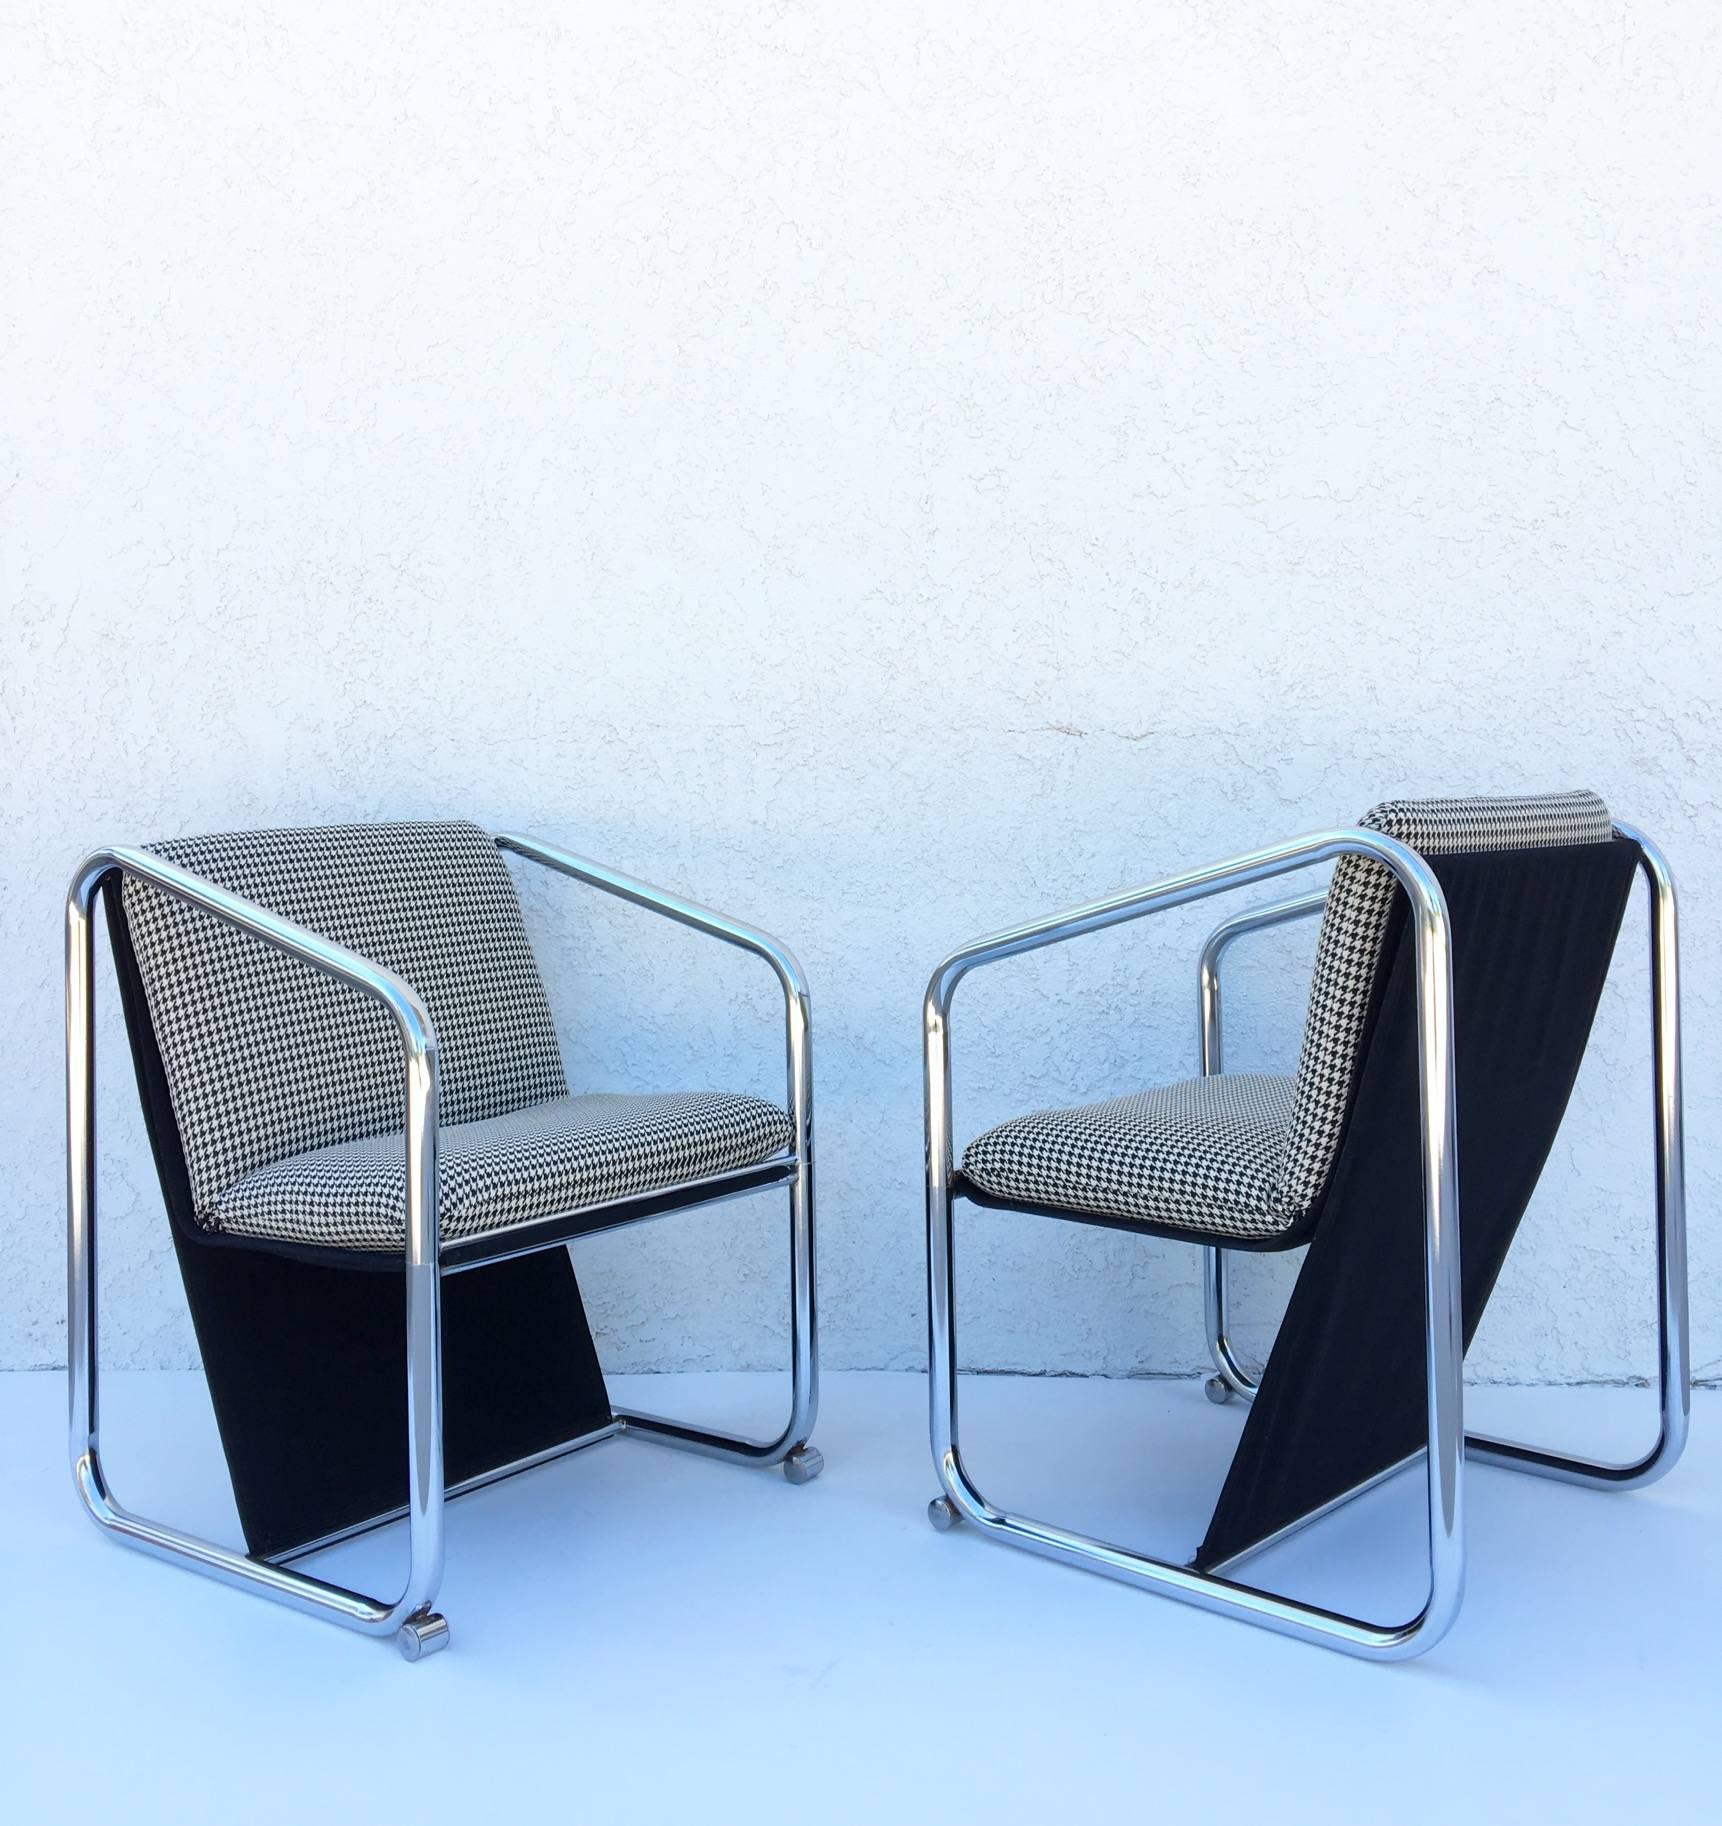 Polished Rare Pair of Chrome Petite Lounge Chairs by Jerry Johnson